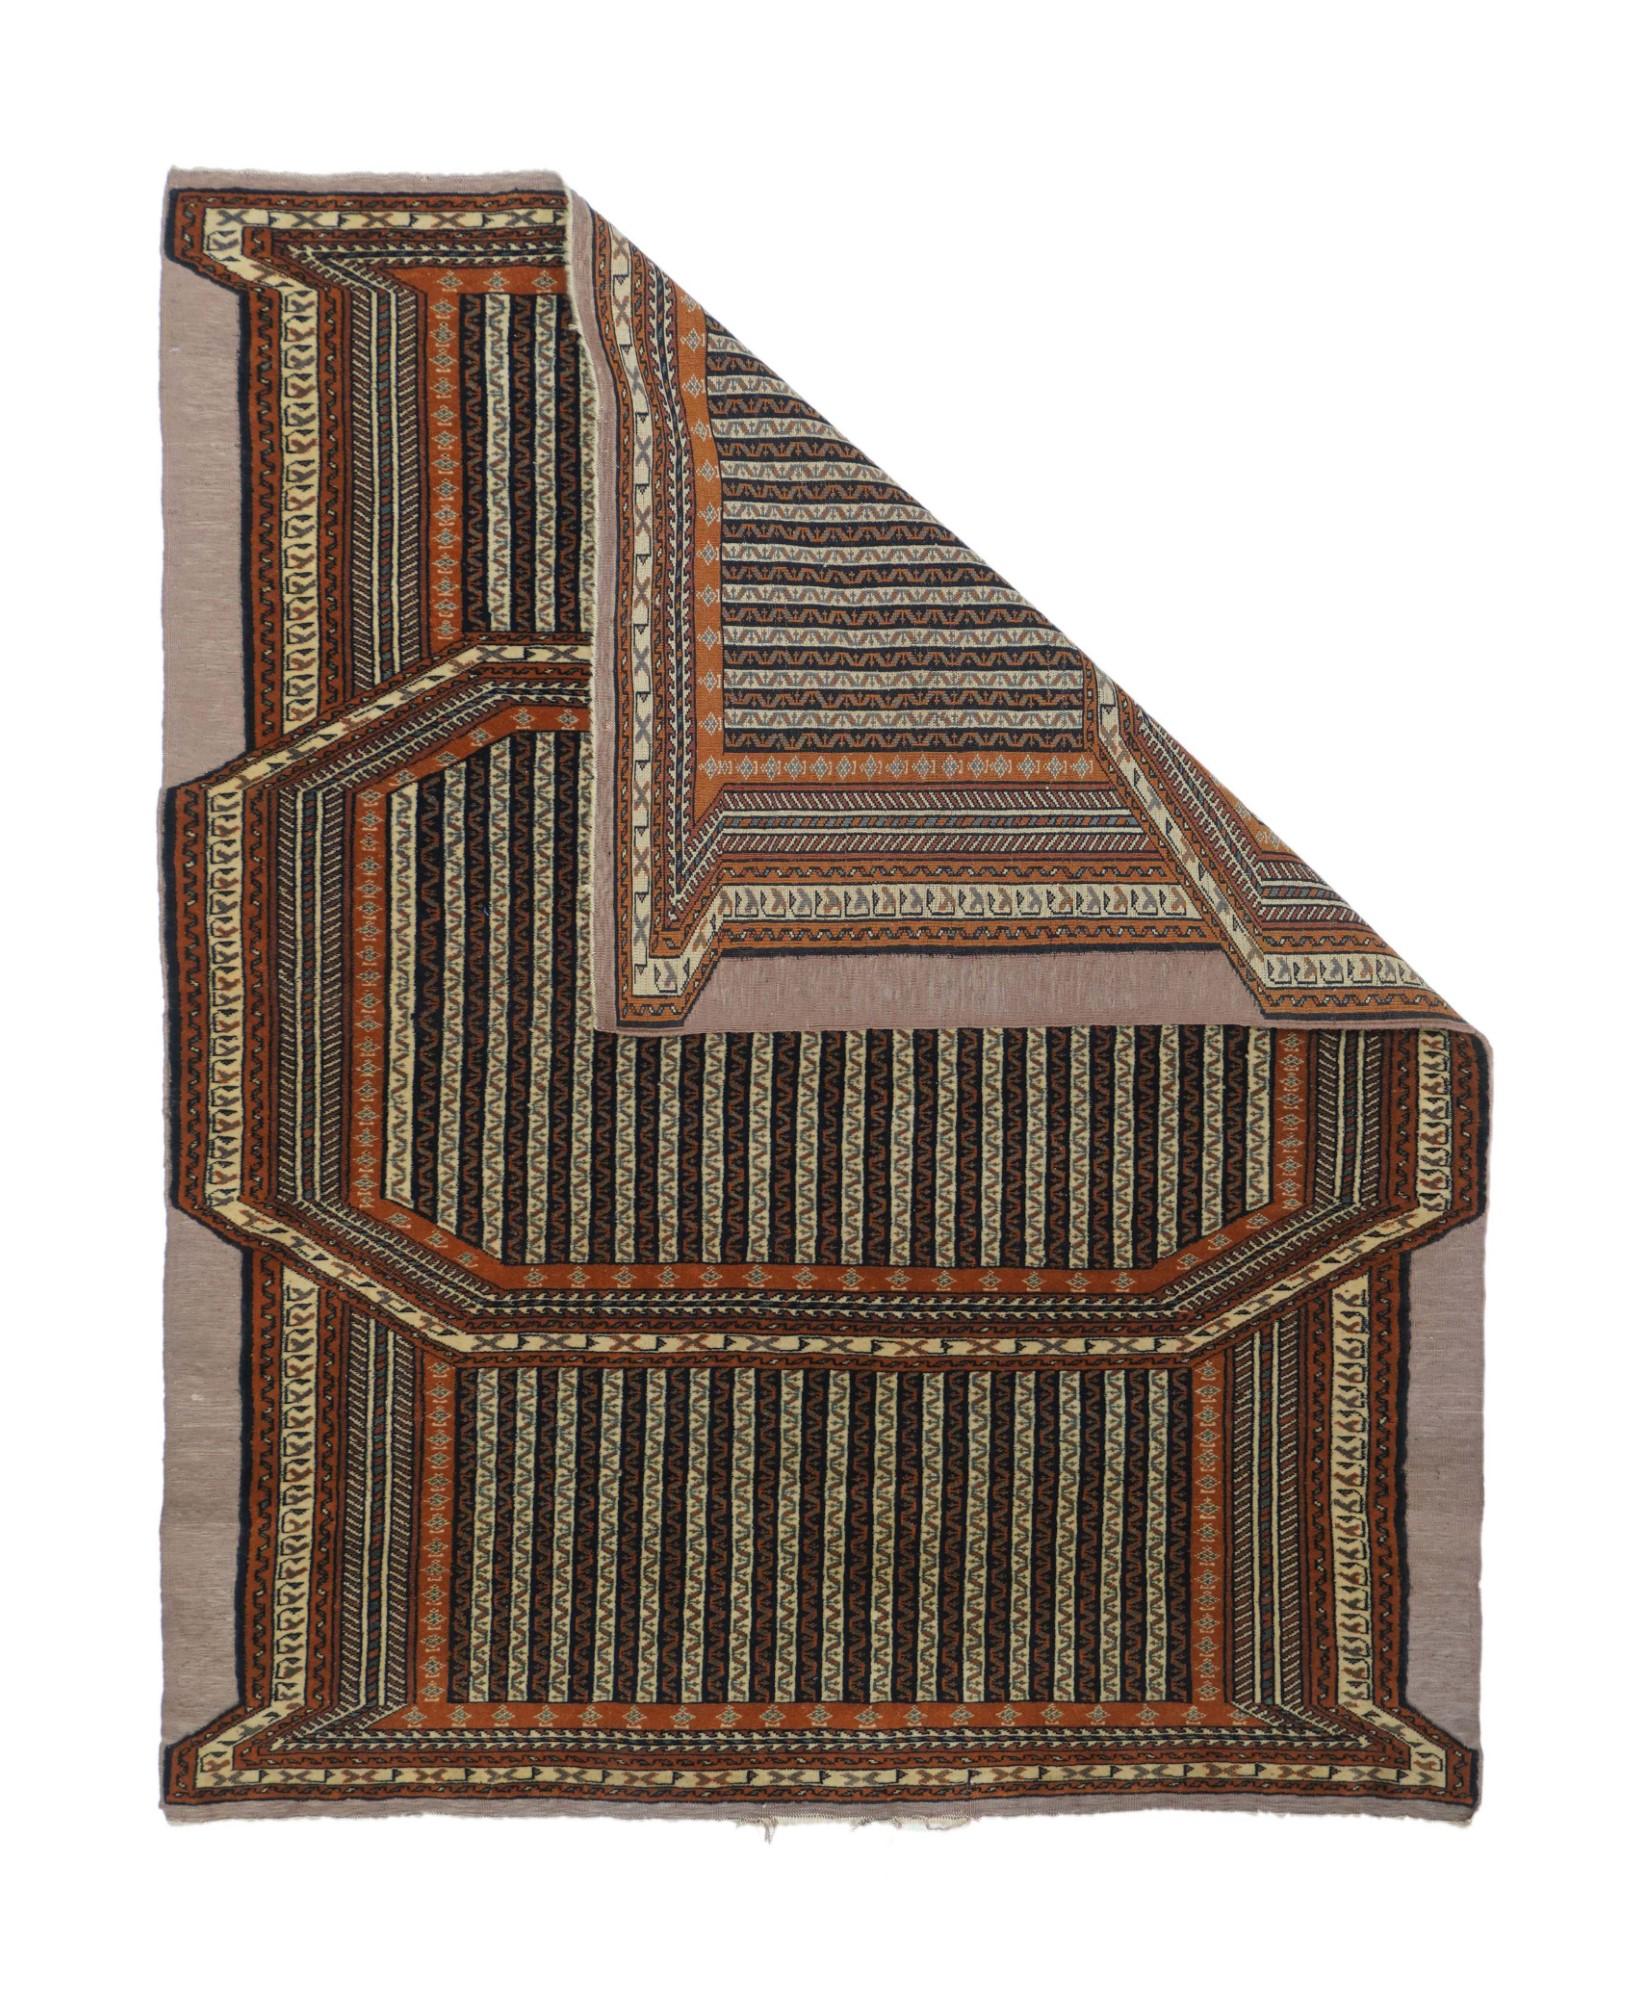 Not Ghouchan or Quchan Kurd, but likely an untrimmed saddle rug from an unidentified east Persian tribe. Stripes alternate in cream and near black, with uniform ribbon meanders. The octagonal section is beneath the rider and the other parts hang